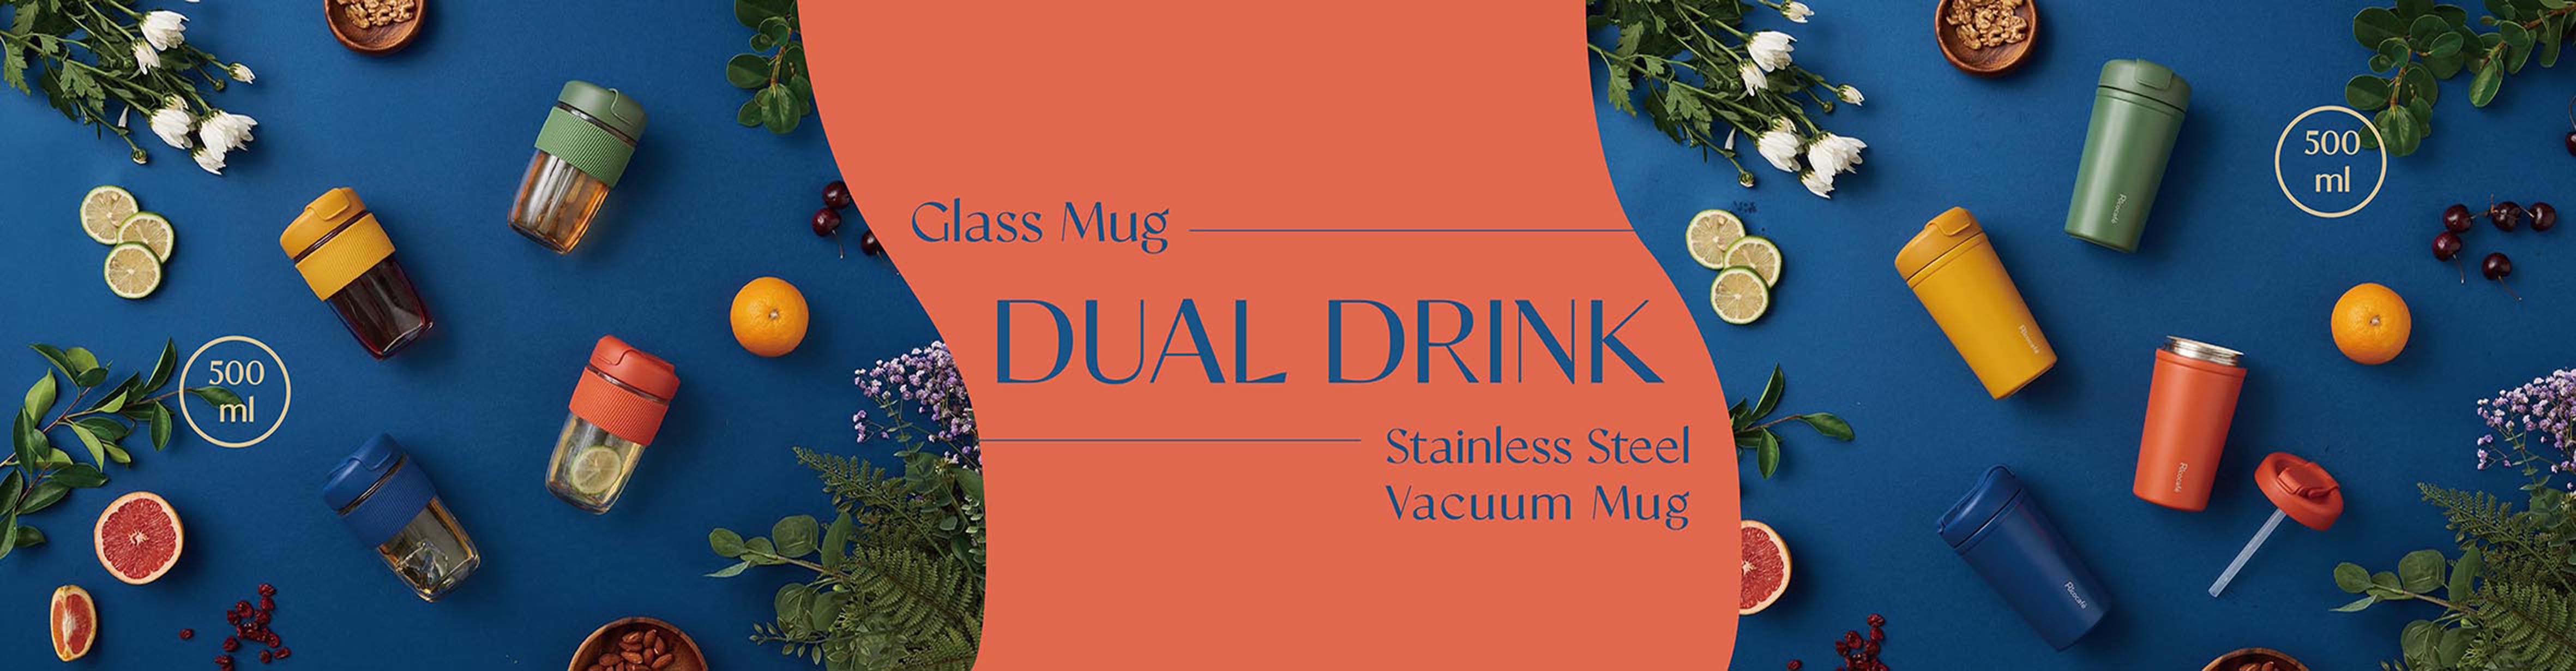 dual drink -banner